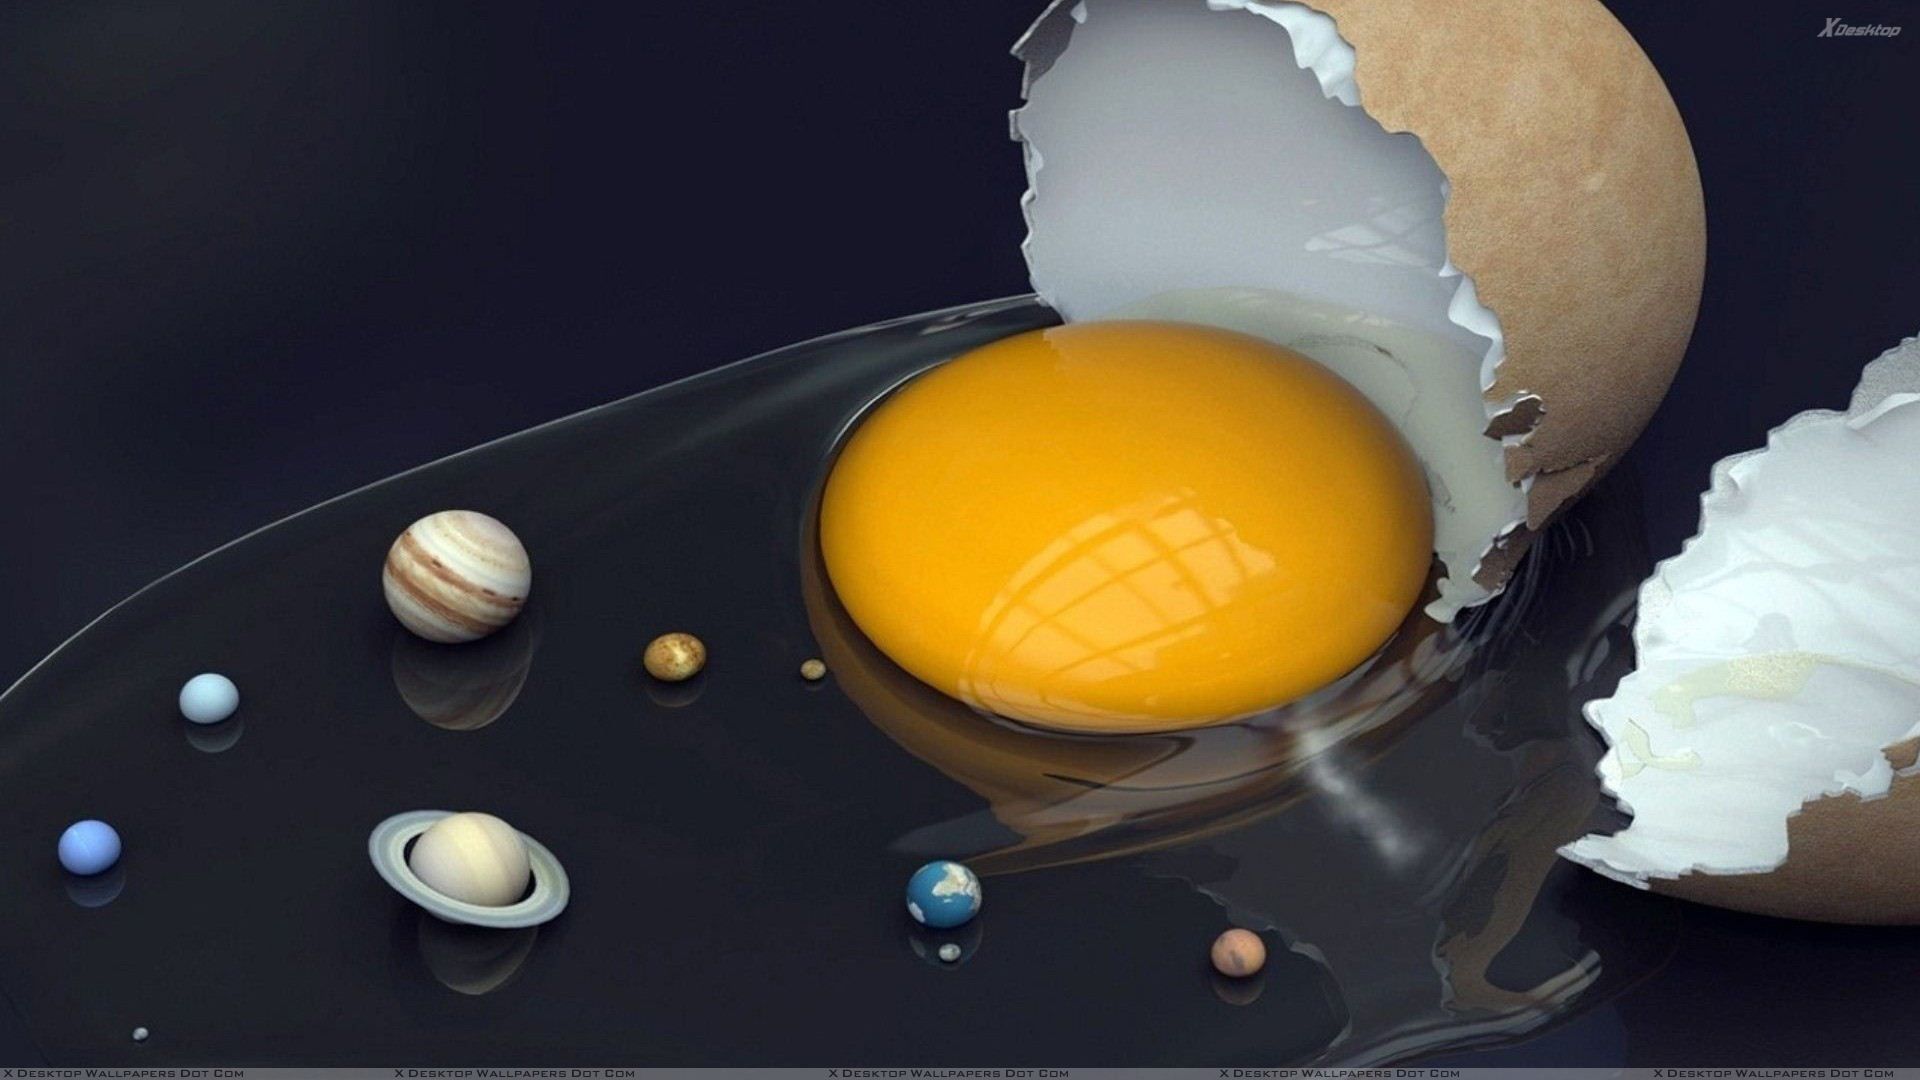 Planets in the egg wallpaper - Science wallpapers - #18338 - Egg